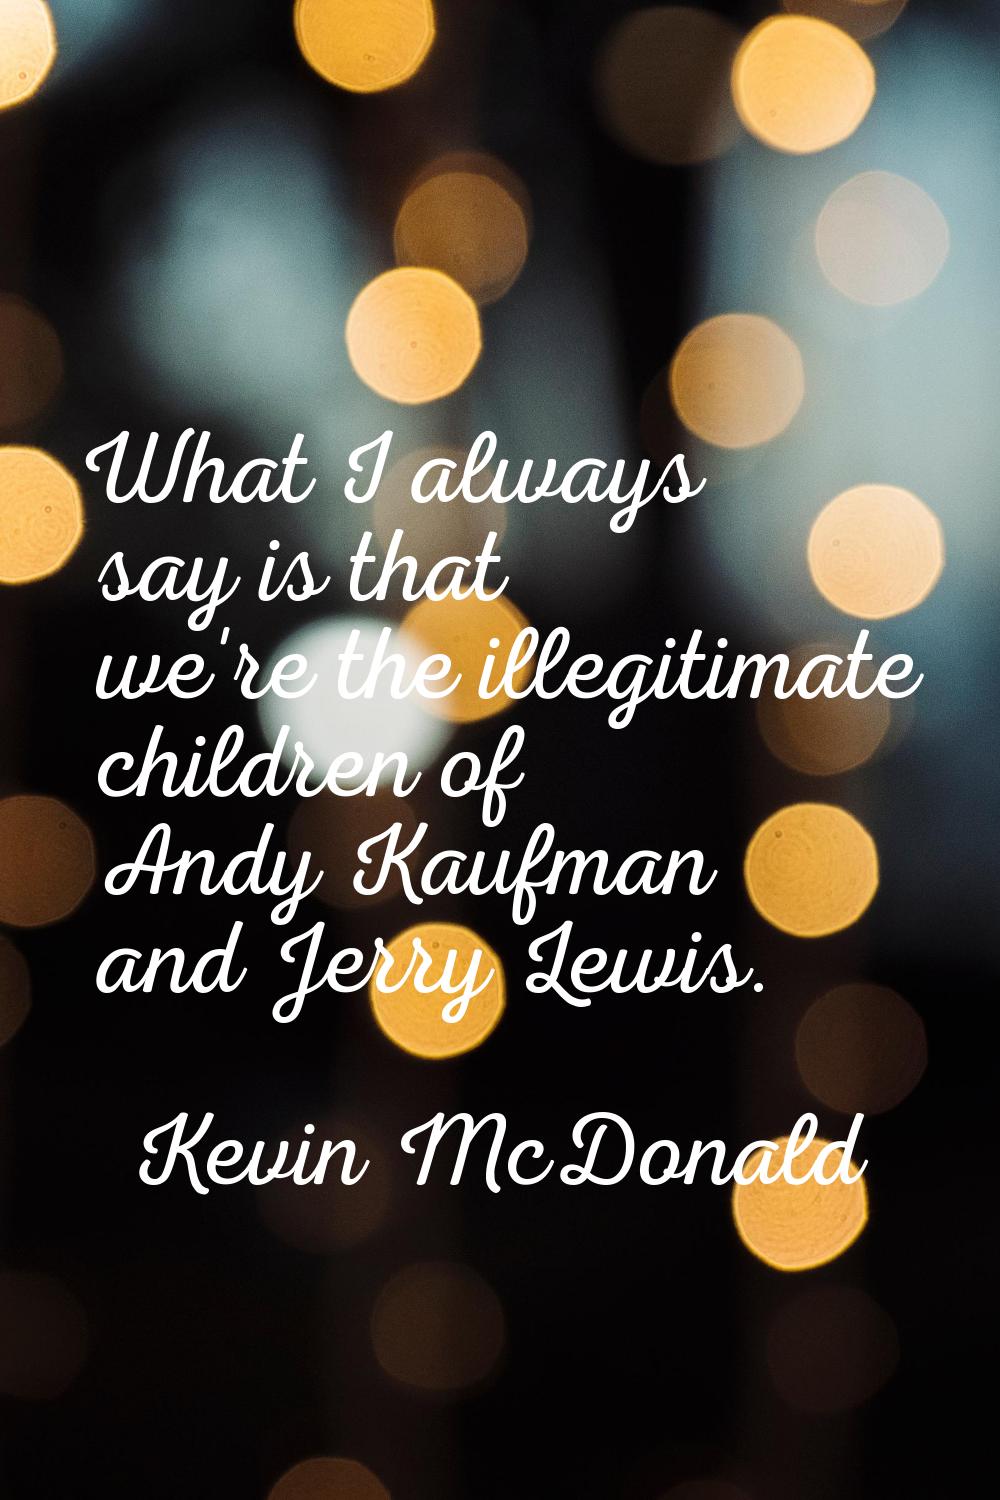 What I always say is that we're the illegitimate children of Andy Kaufman and Jerry Lewis.